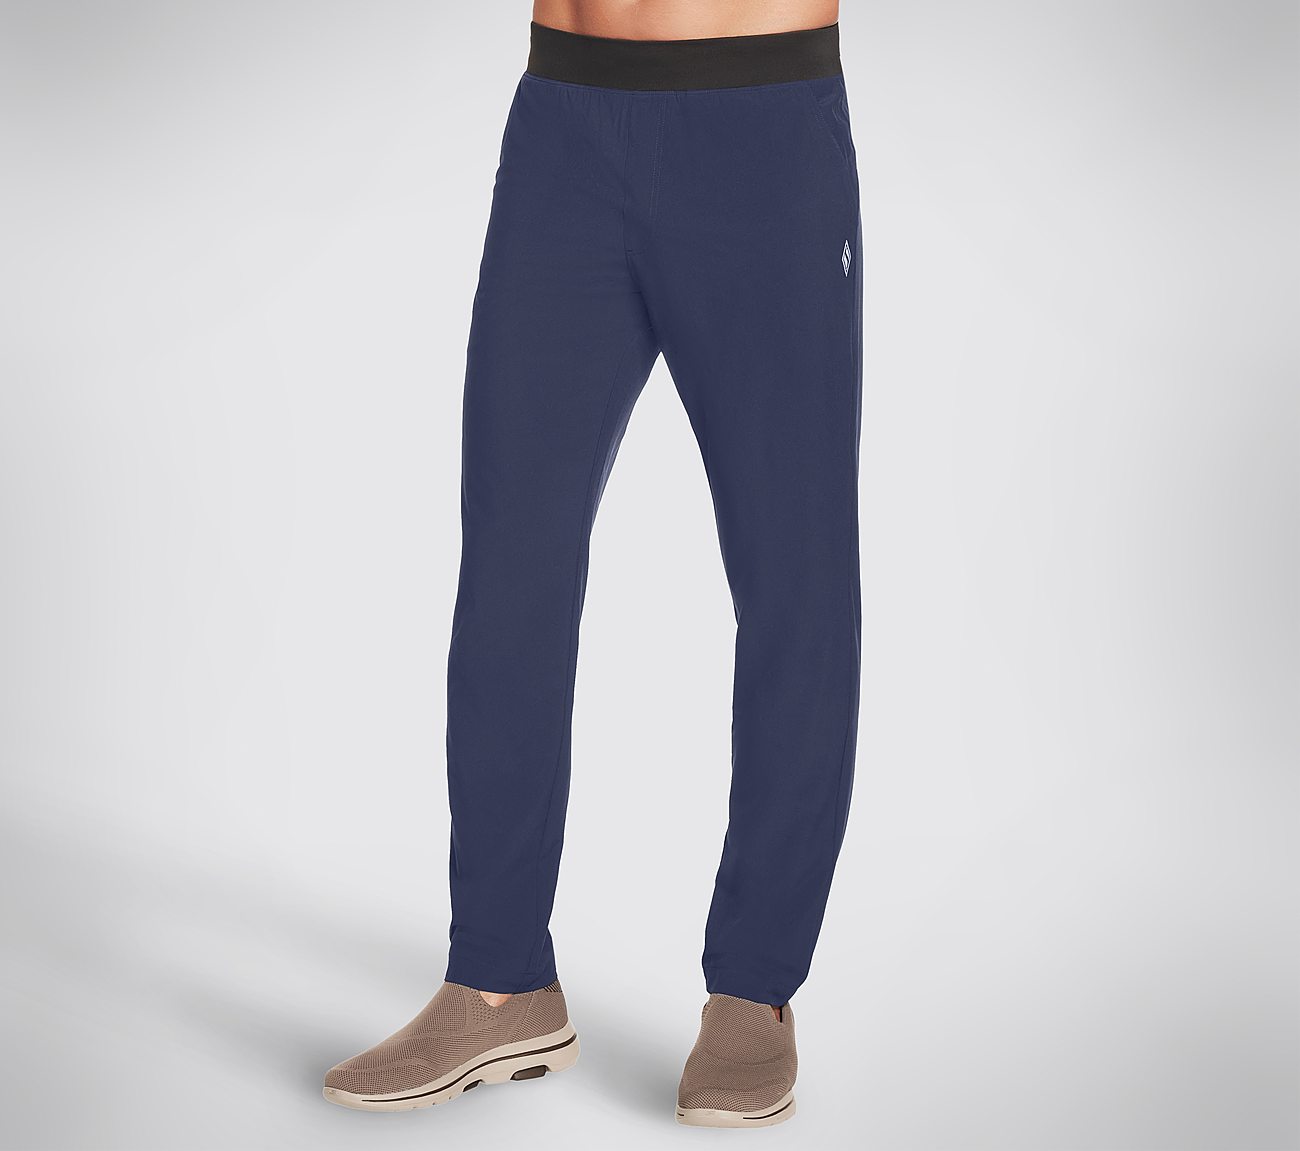 GO WALK ACTION PANT, NNNAVY Apparels Lateral View